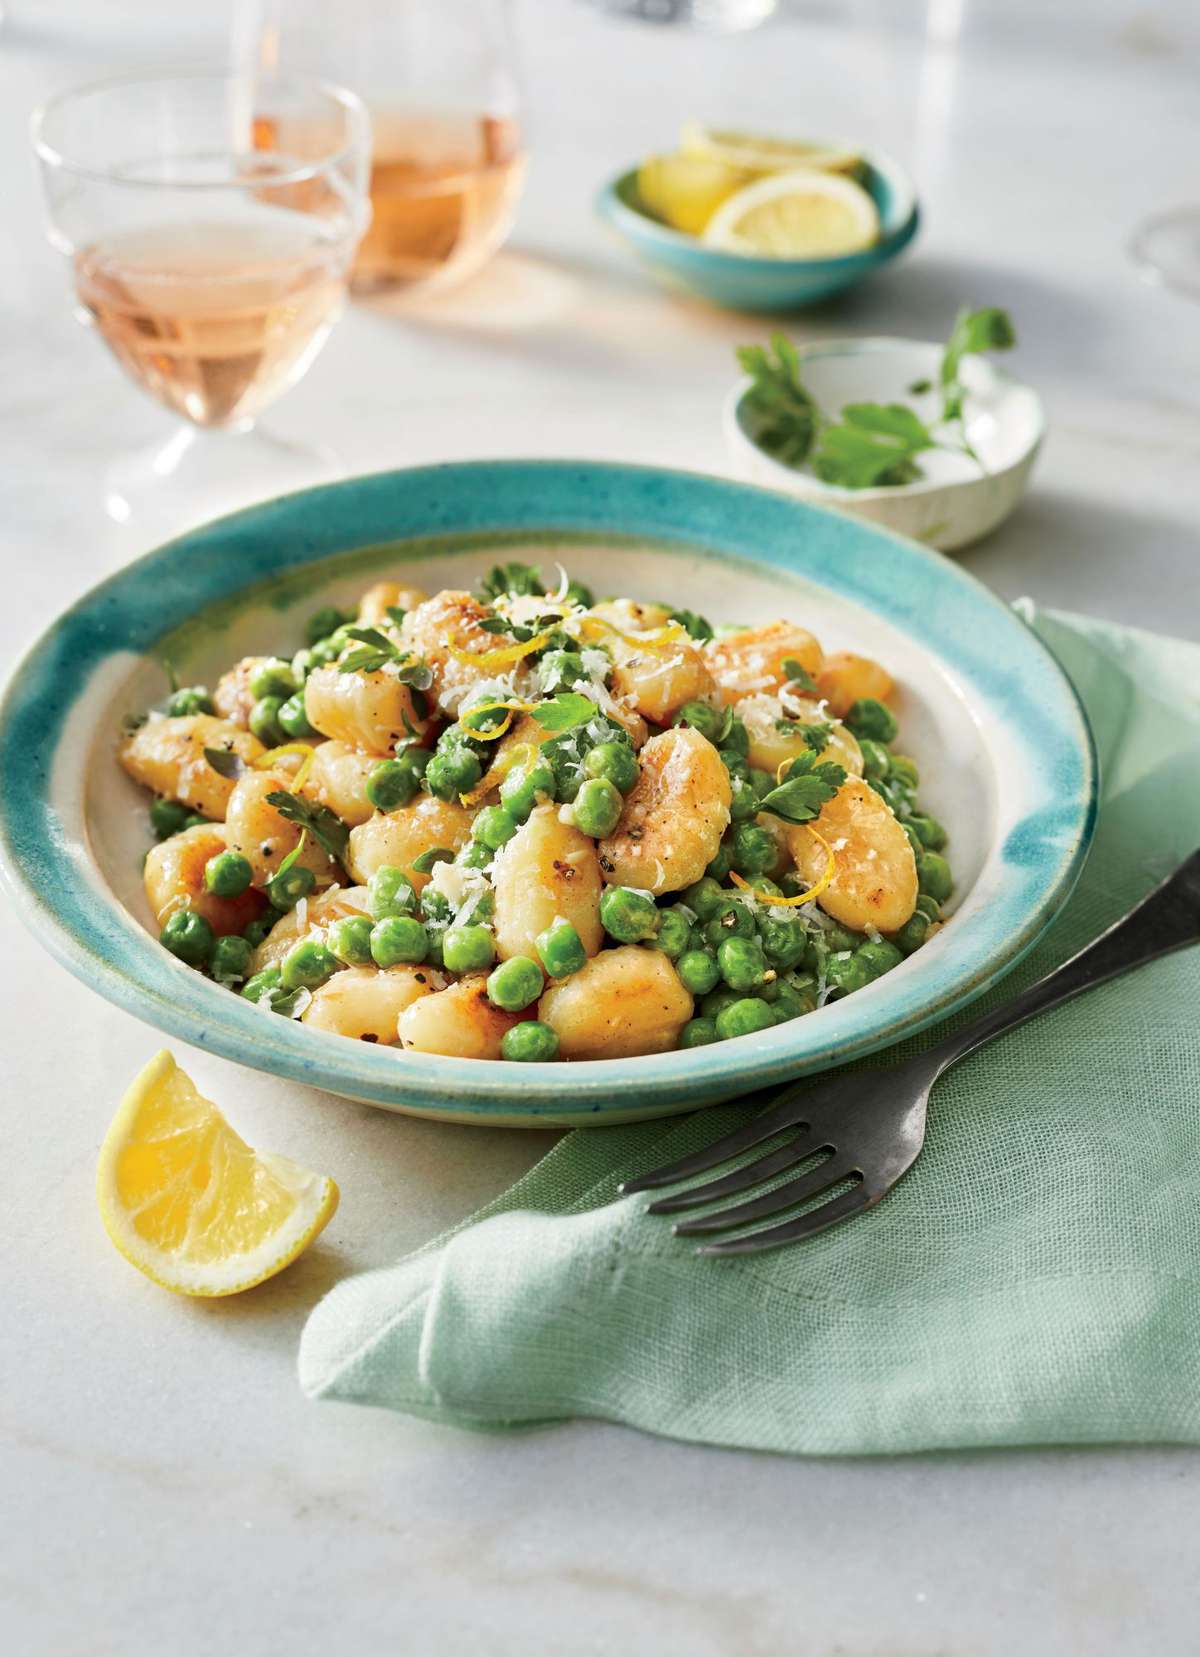 Skillet-Toasted Gnocchi with Peas